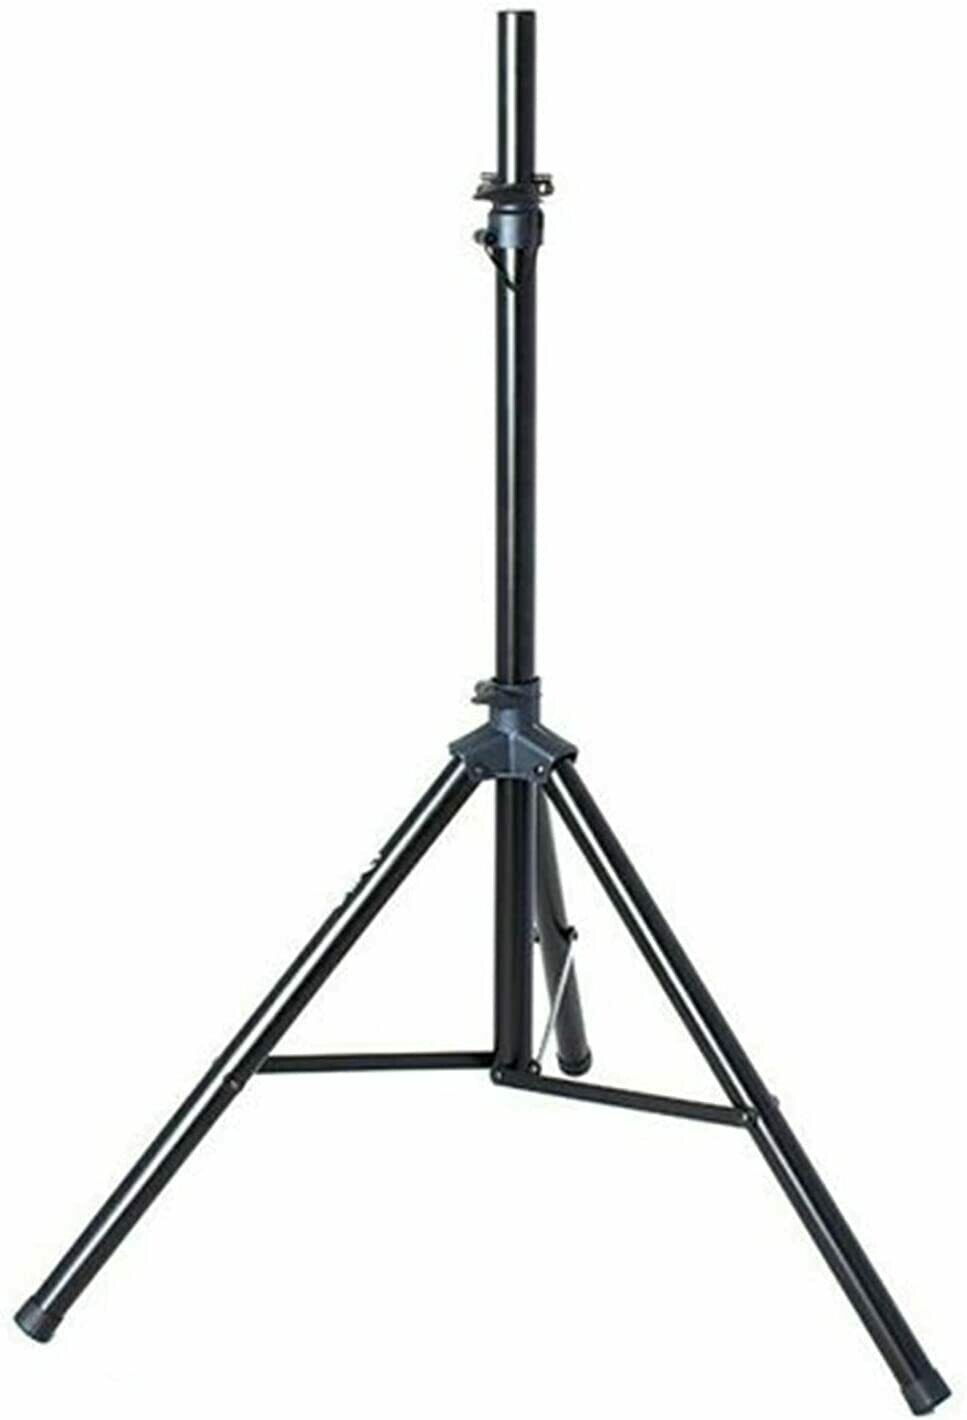 Universal PA DJ Tripod Speaker Stand Kit with Adjustable Height Constructed